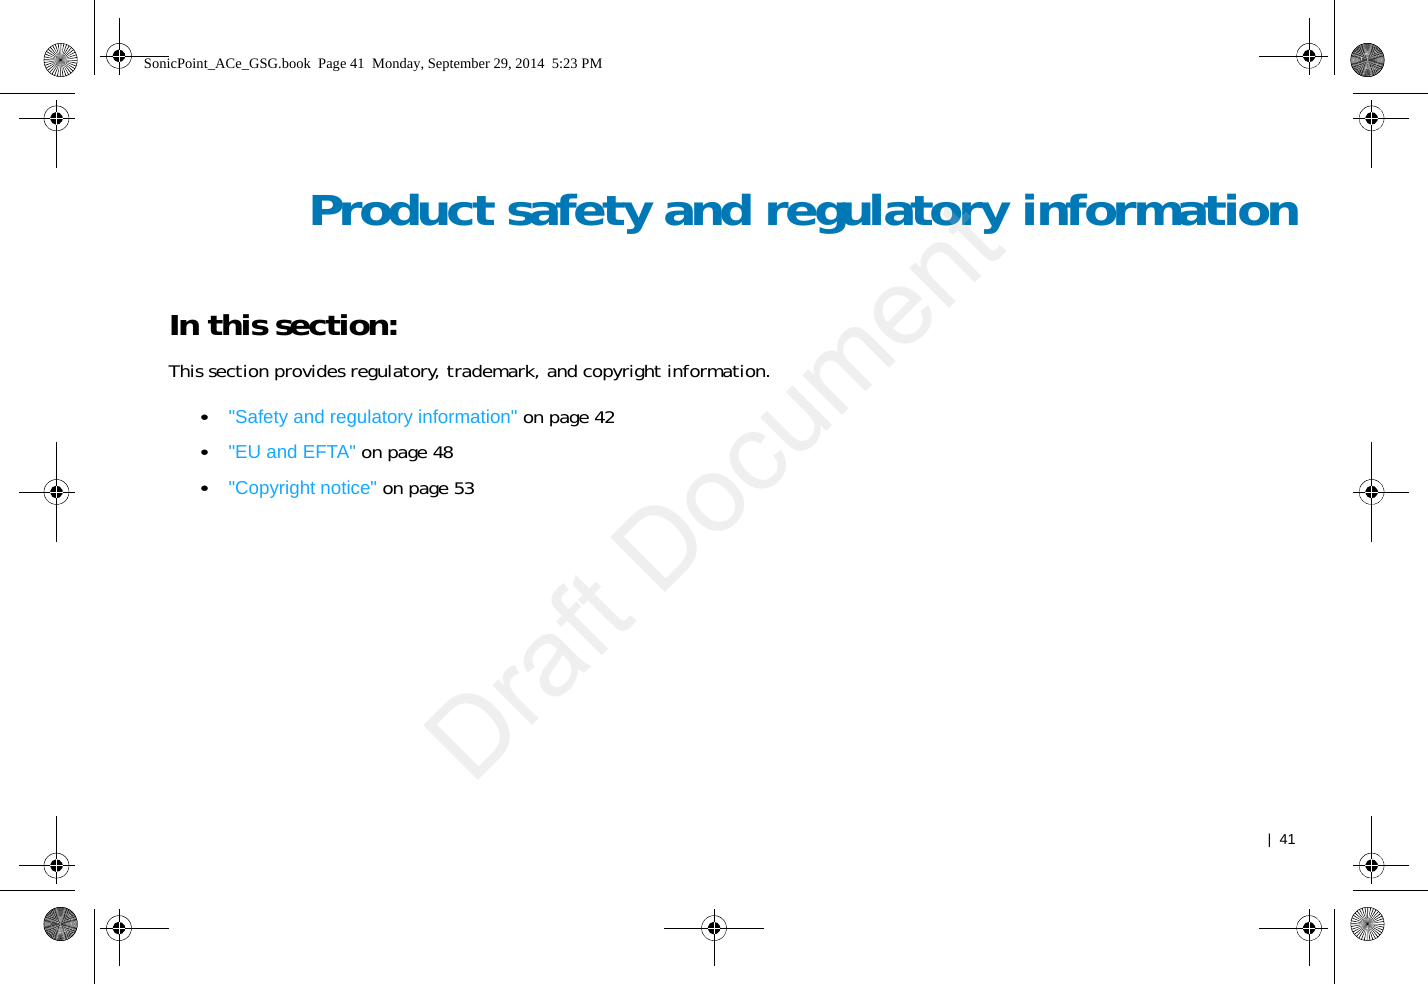   |  41Product safety and regulatory informationIn this section:This section provides regulatory, trademark, and copyright information.•&quot;Safety and regulatory information&quot; on page 42•&quot;EU and EFTA&quot; on page 48•&quot;Copyright notice&quot; on page 53SonicPoint_ACe_GSG.book  Page 41  Monday, September 29, 2014  5:23 PMDraft Document